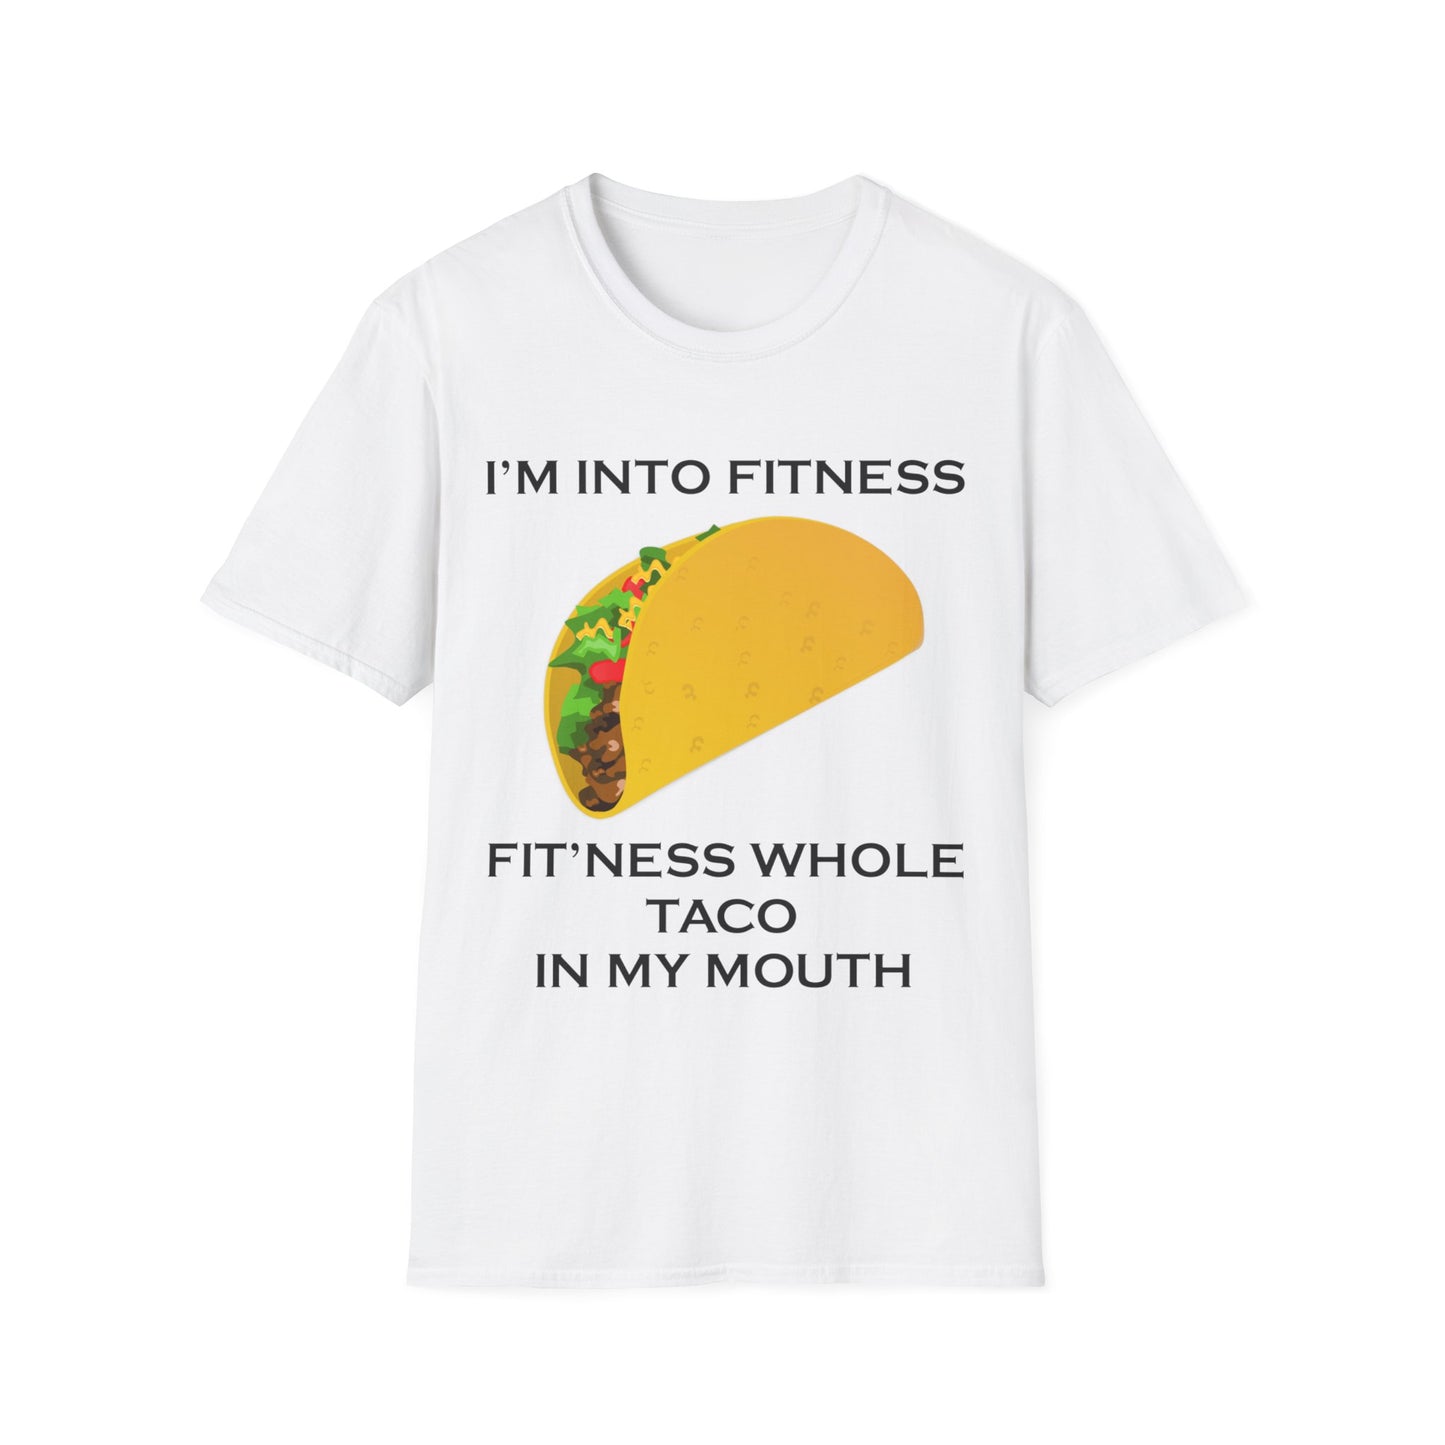 A white t-shirt with a design of a taco and a funny quote: I'm Into Fitness, Fit'ness Whole Taco In My Mouth